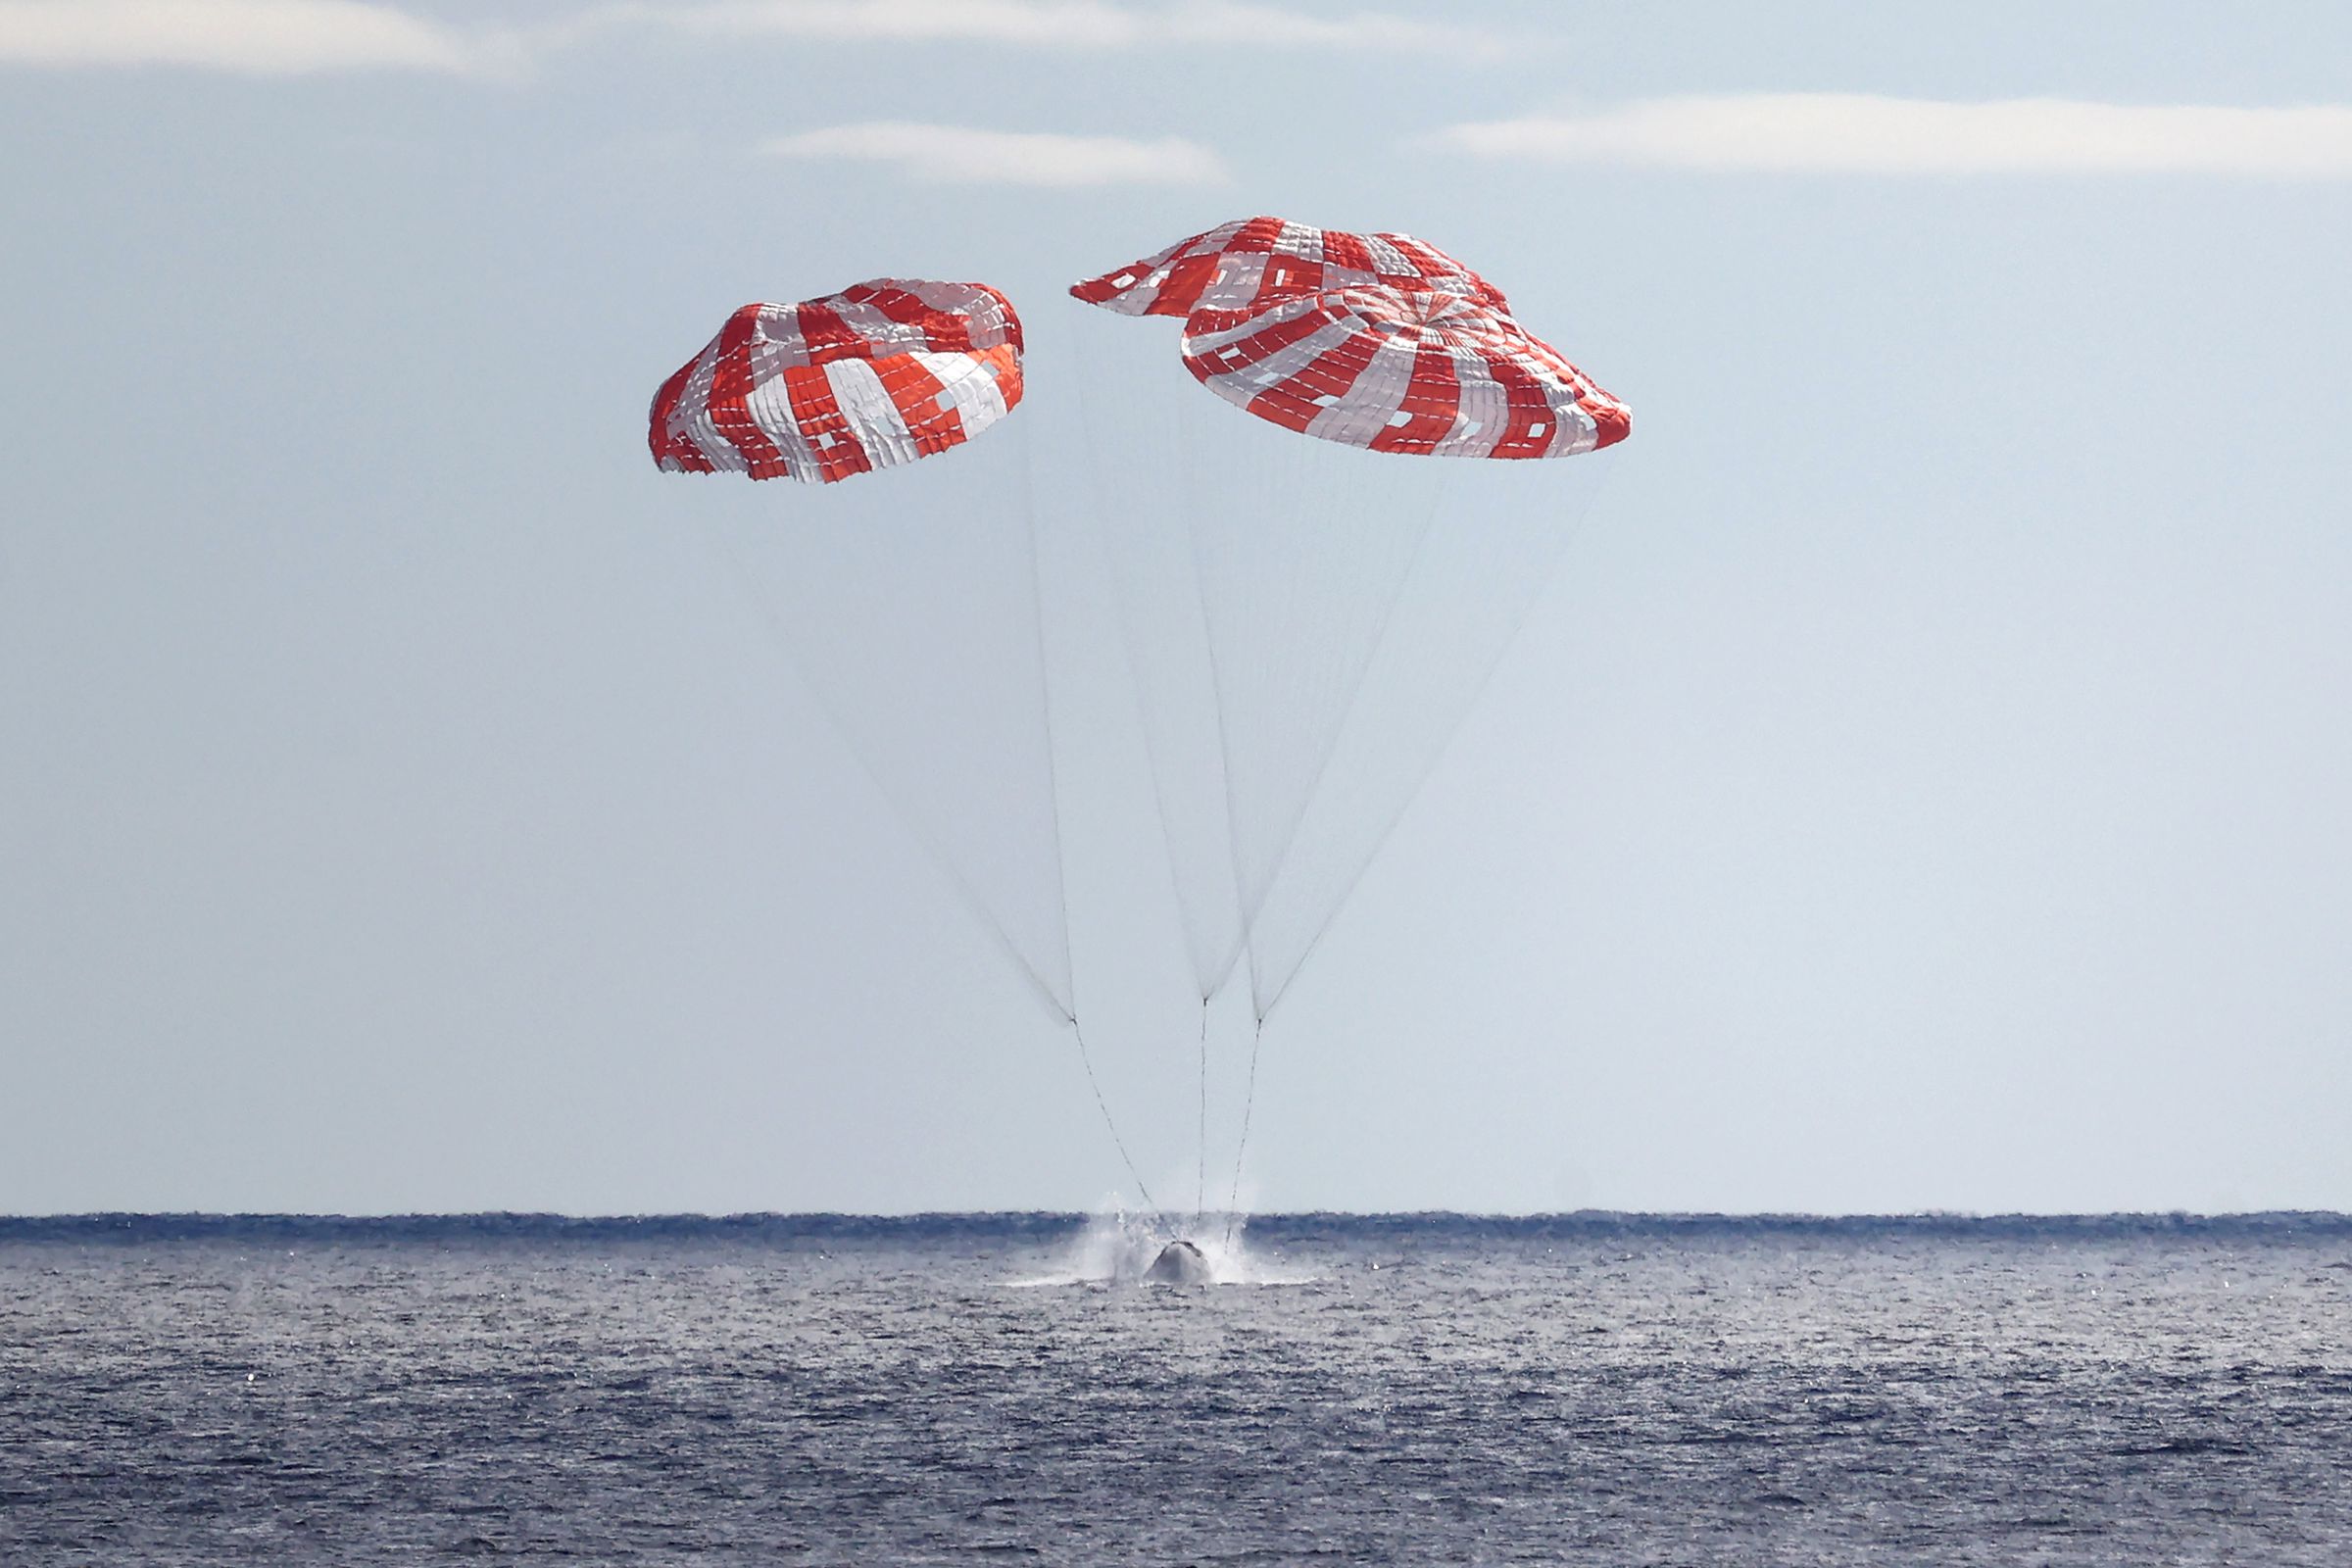 NASA’s Orion Capsule Splashes Down In The Pacific After Successful Uncrewed Artemis I Moon Mission